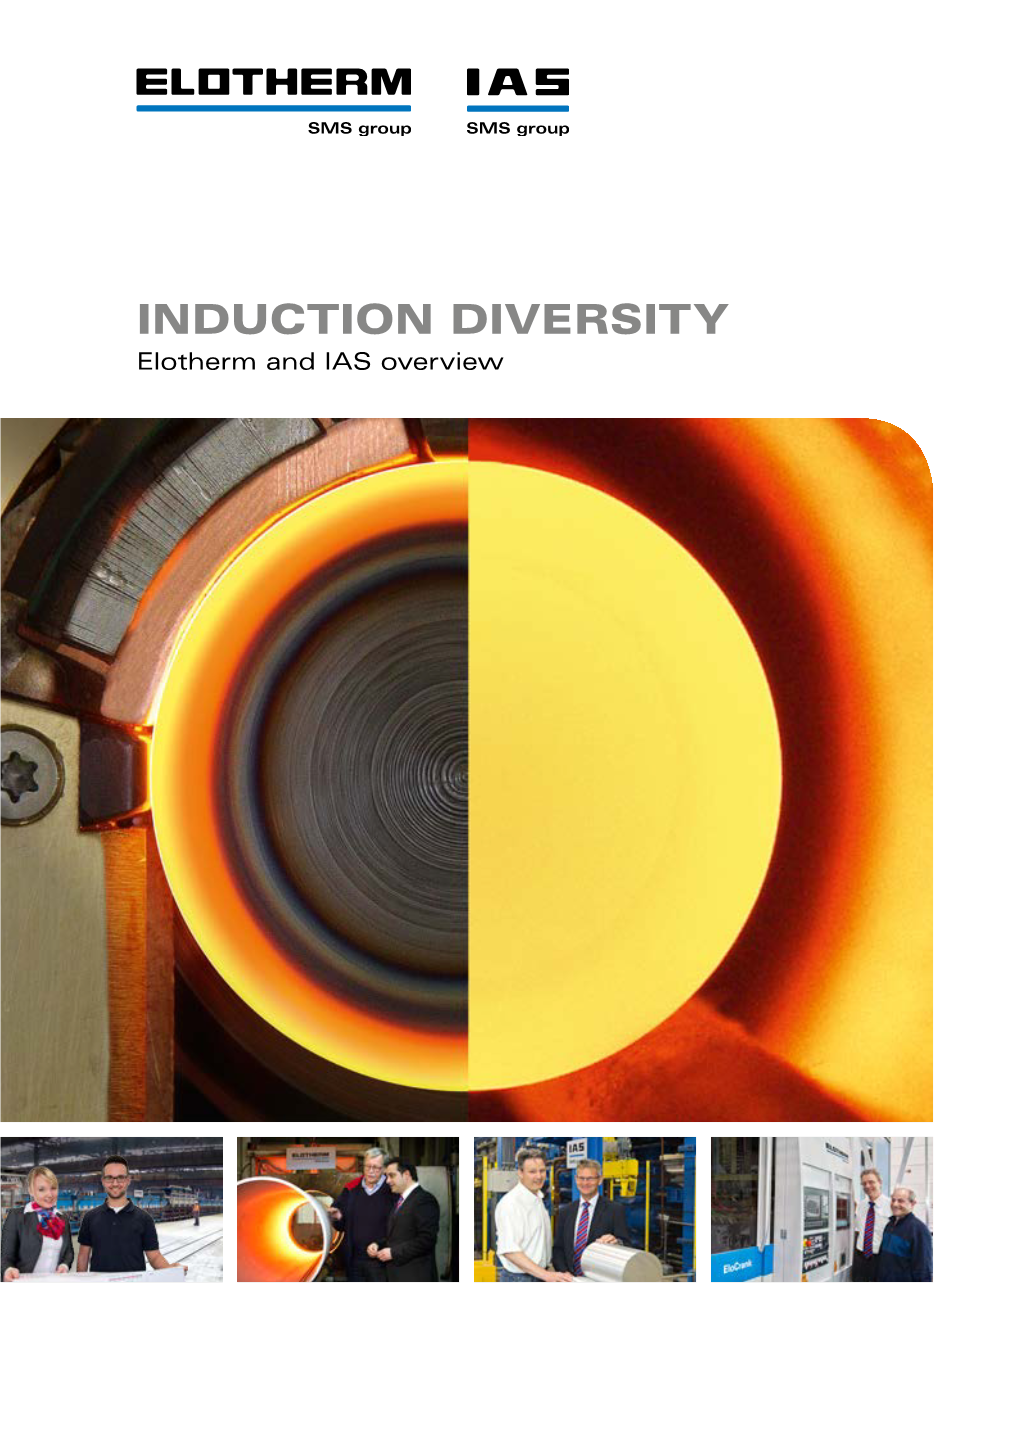 INDUCTION DIVERSITY Elotherm and IAS Overview SMS GROUP Leaders in Plant Construction and Machine Engineering